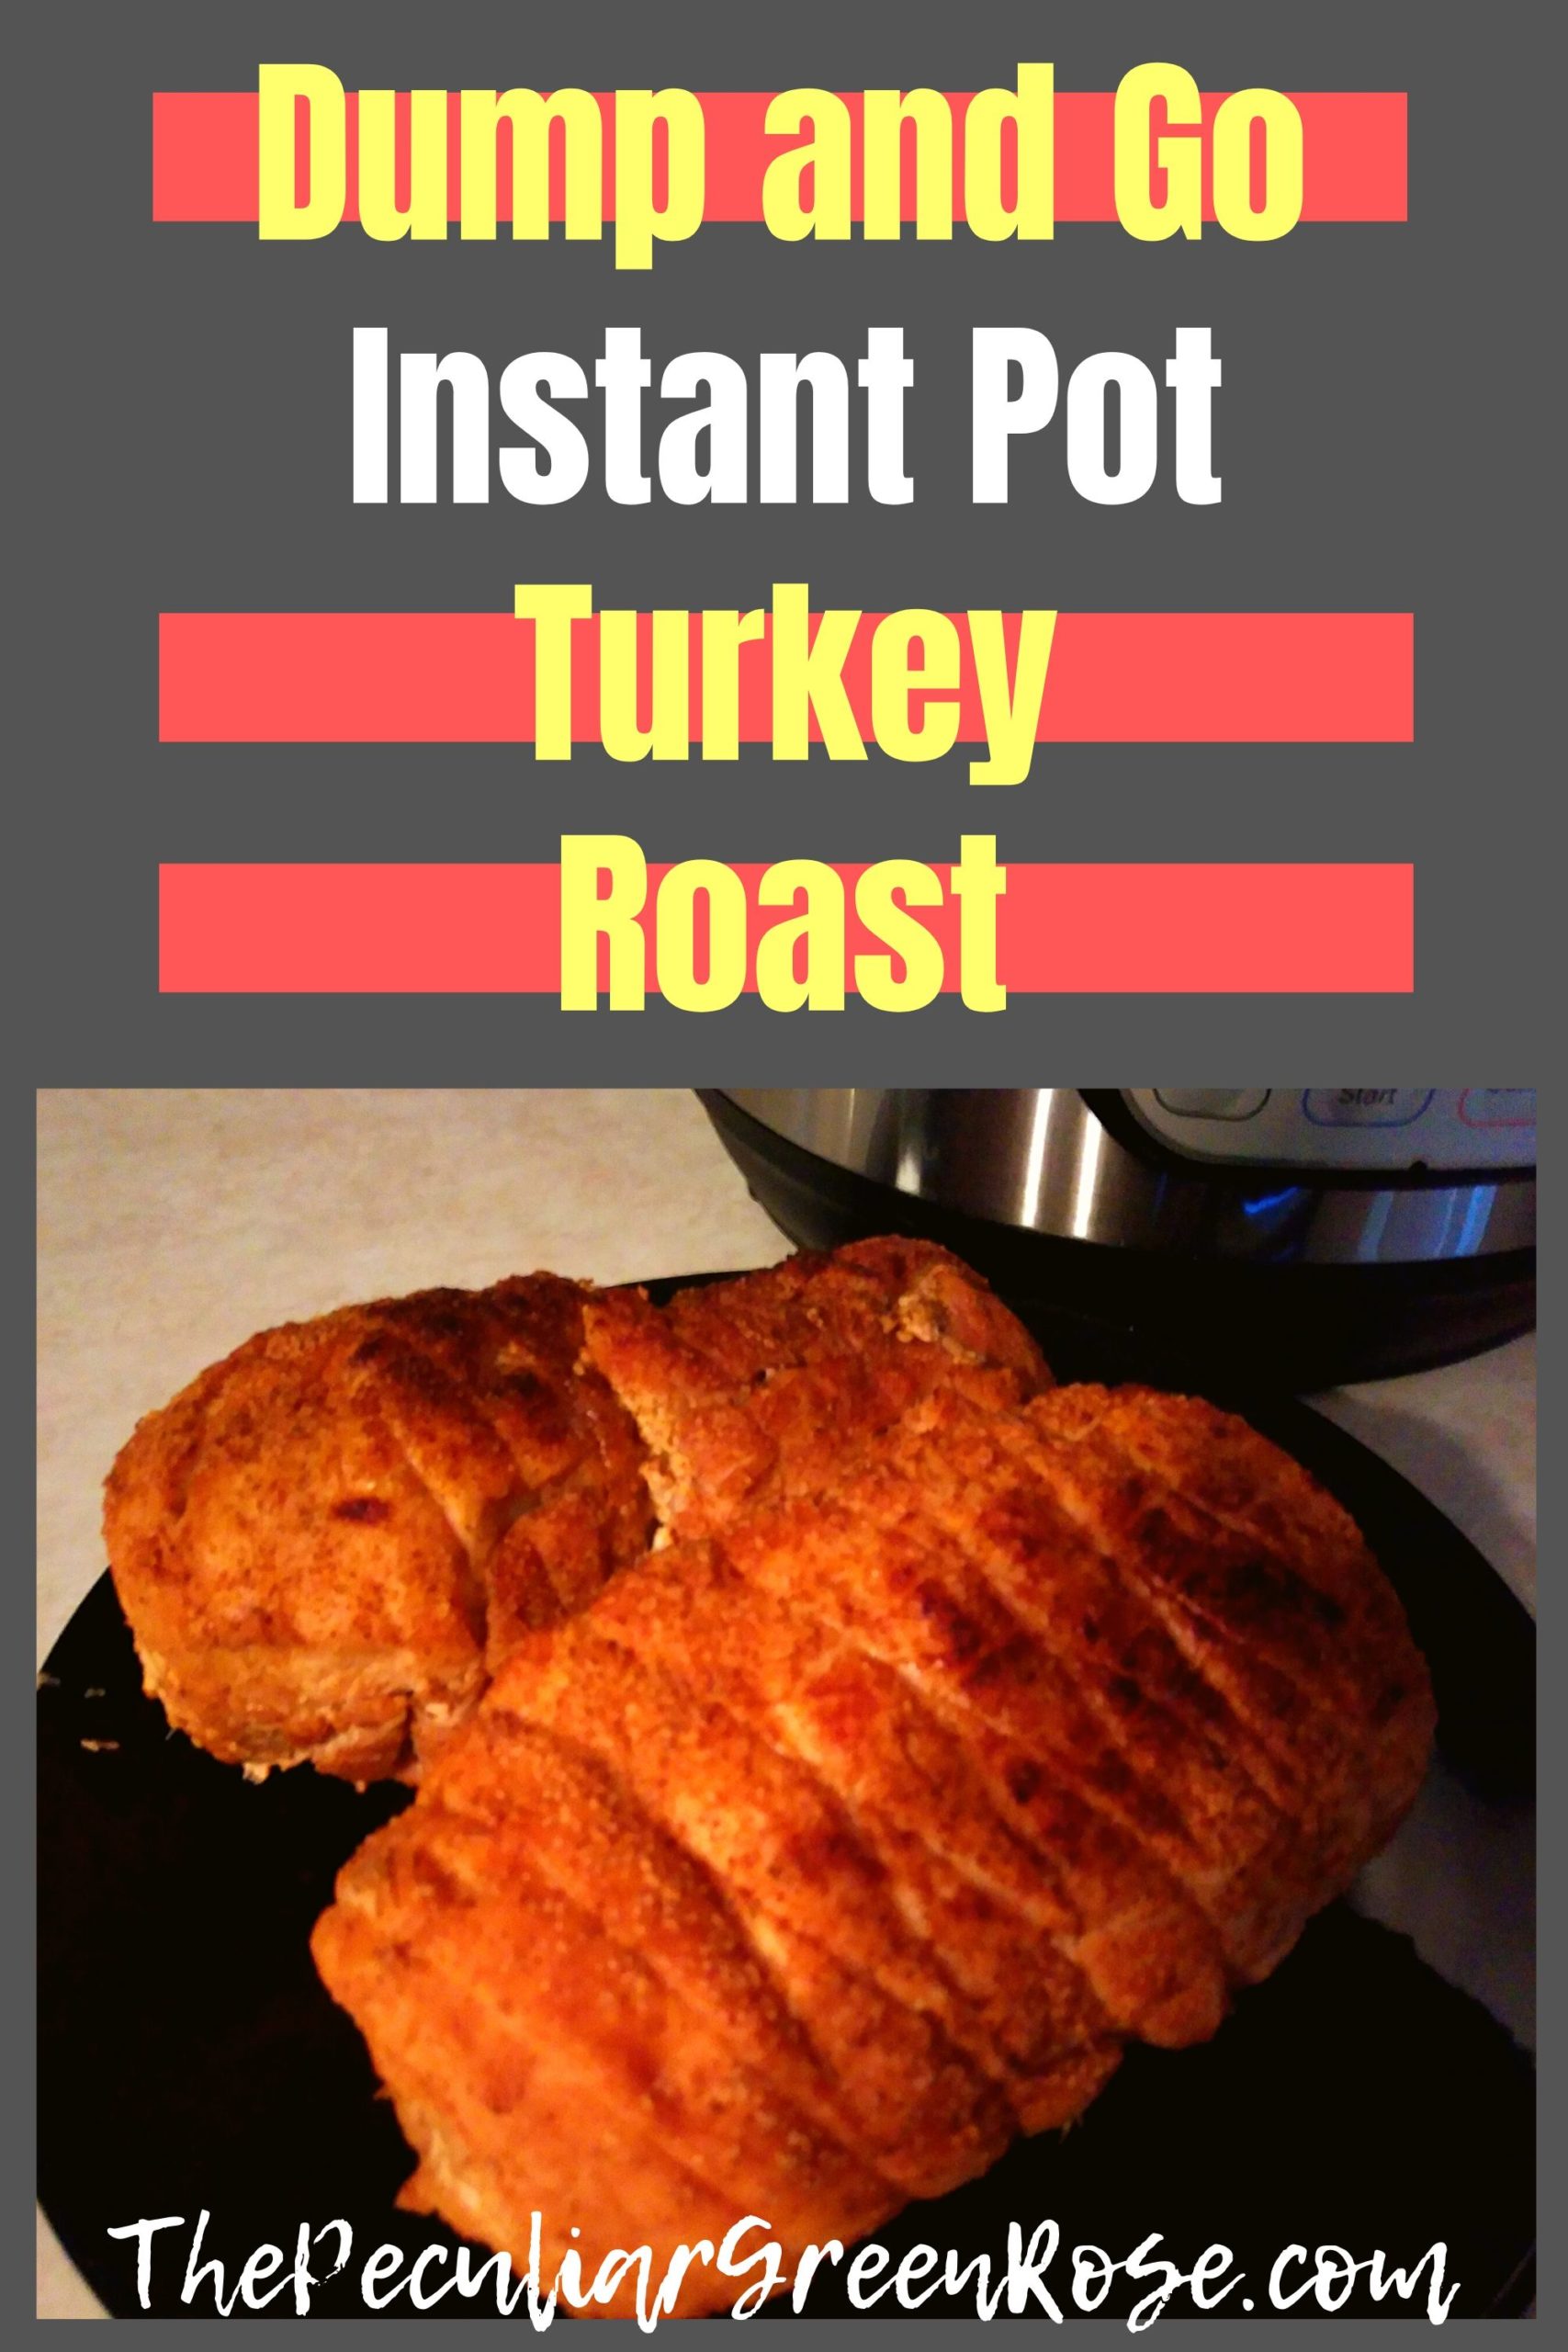 A black plate with two Turkey roasts sitting in front of an Instant Pot on a counter.